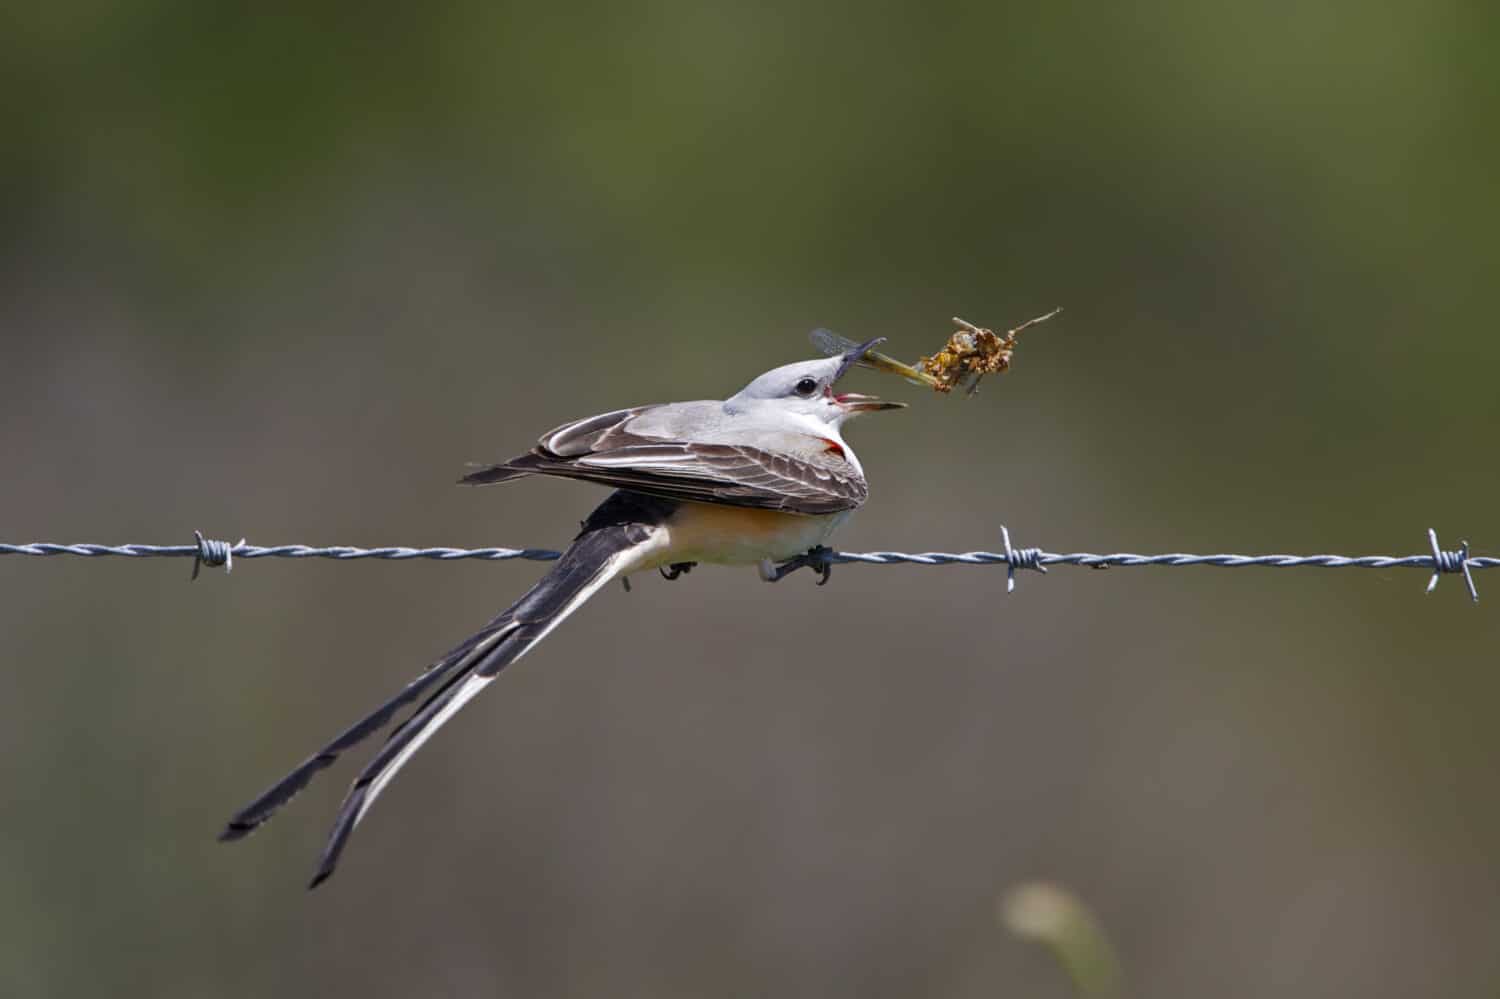 Male Scissor-tailed Flycatcher (Tyrannus forficatus) Perched on a Barbed Wire Fence Eating a Locust - Texas